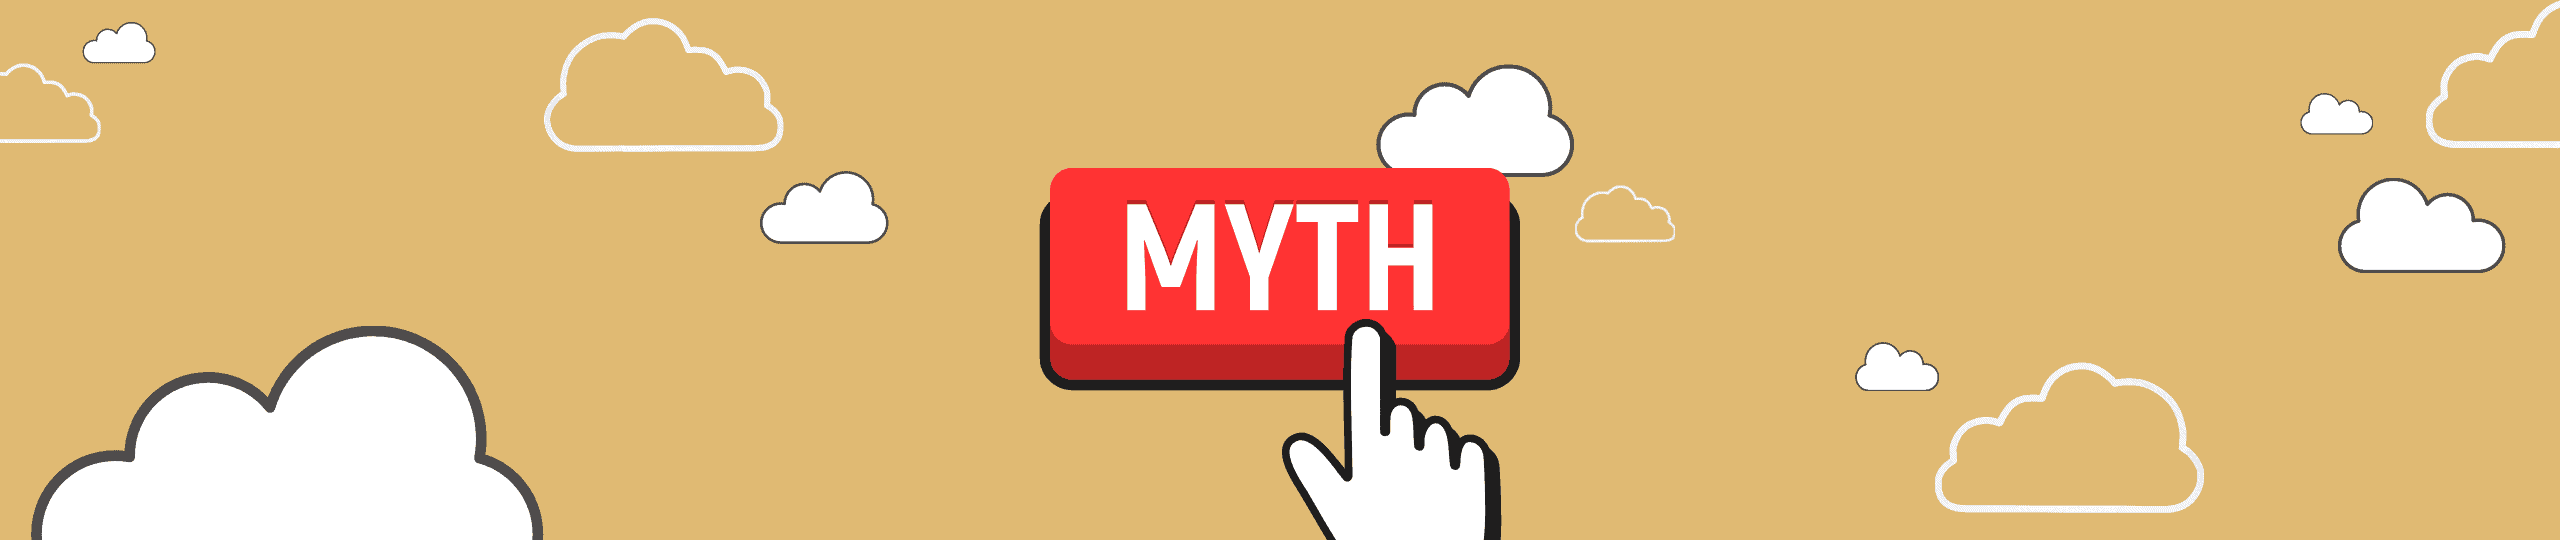 Top 5 Myths of Unified Communications